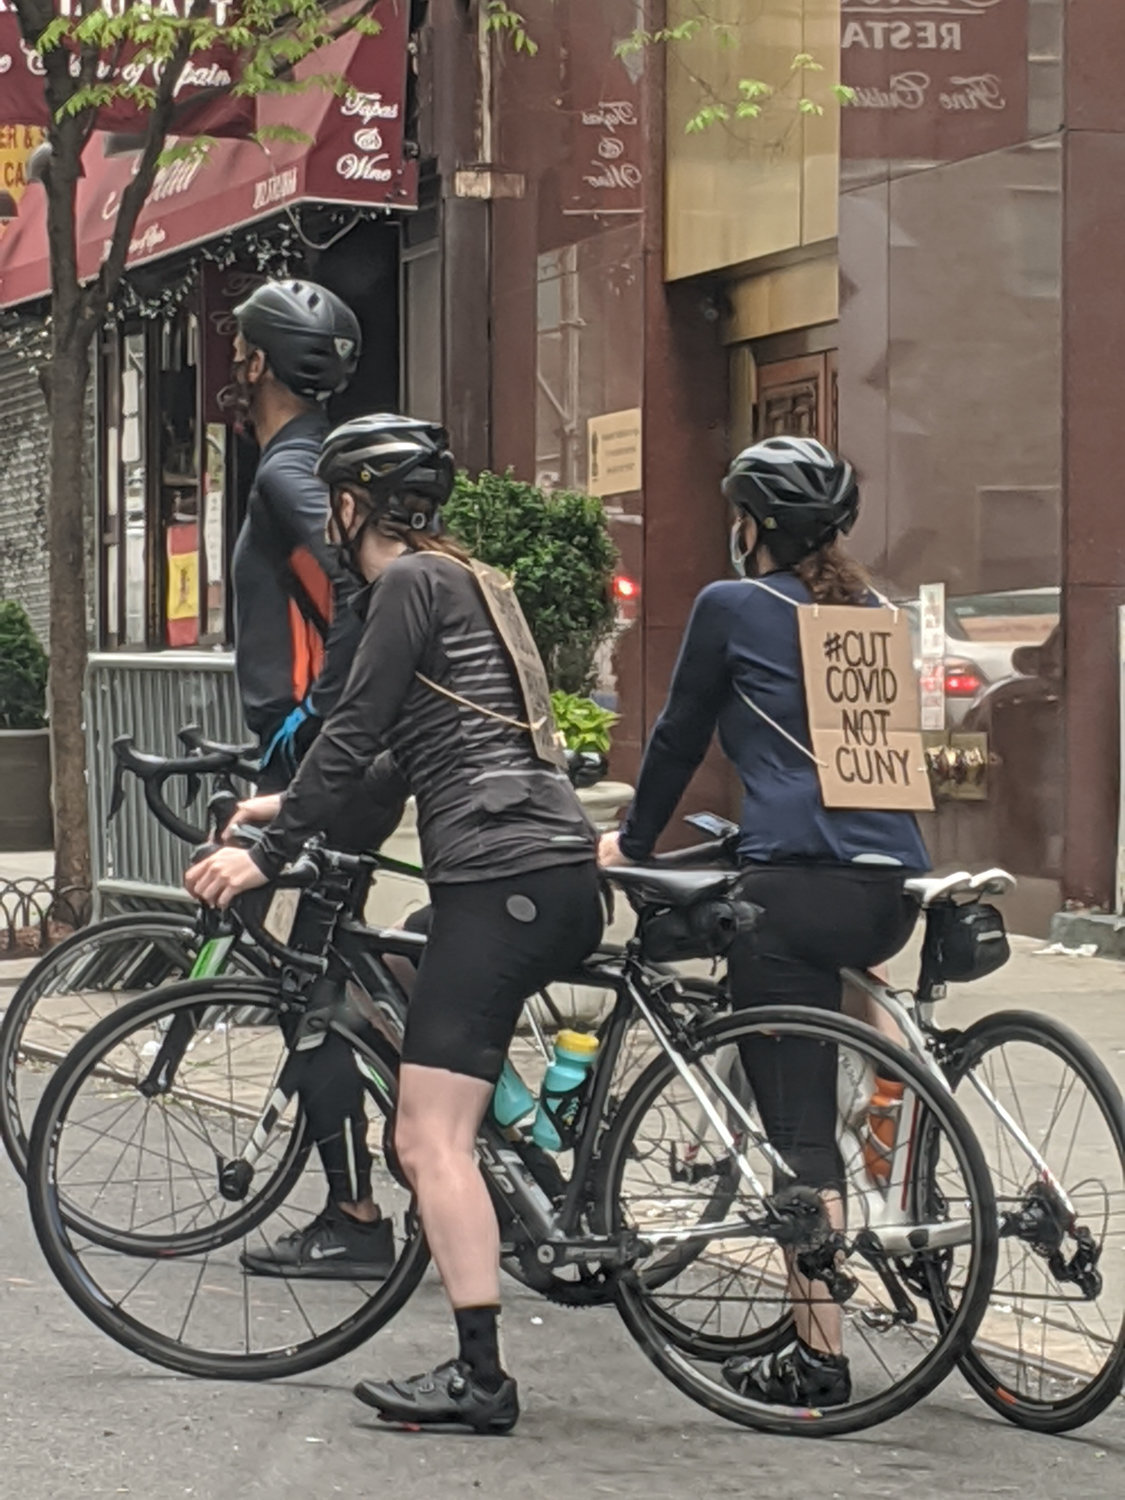 Cyclists wear cardboard signs during a protest against layoffs at various schools within the CUNY system.